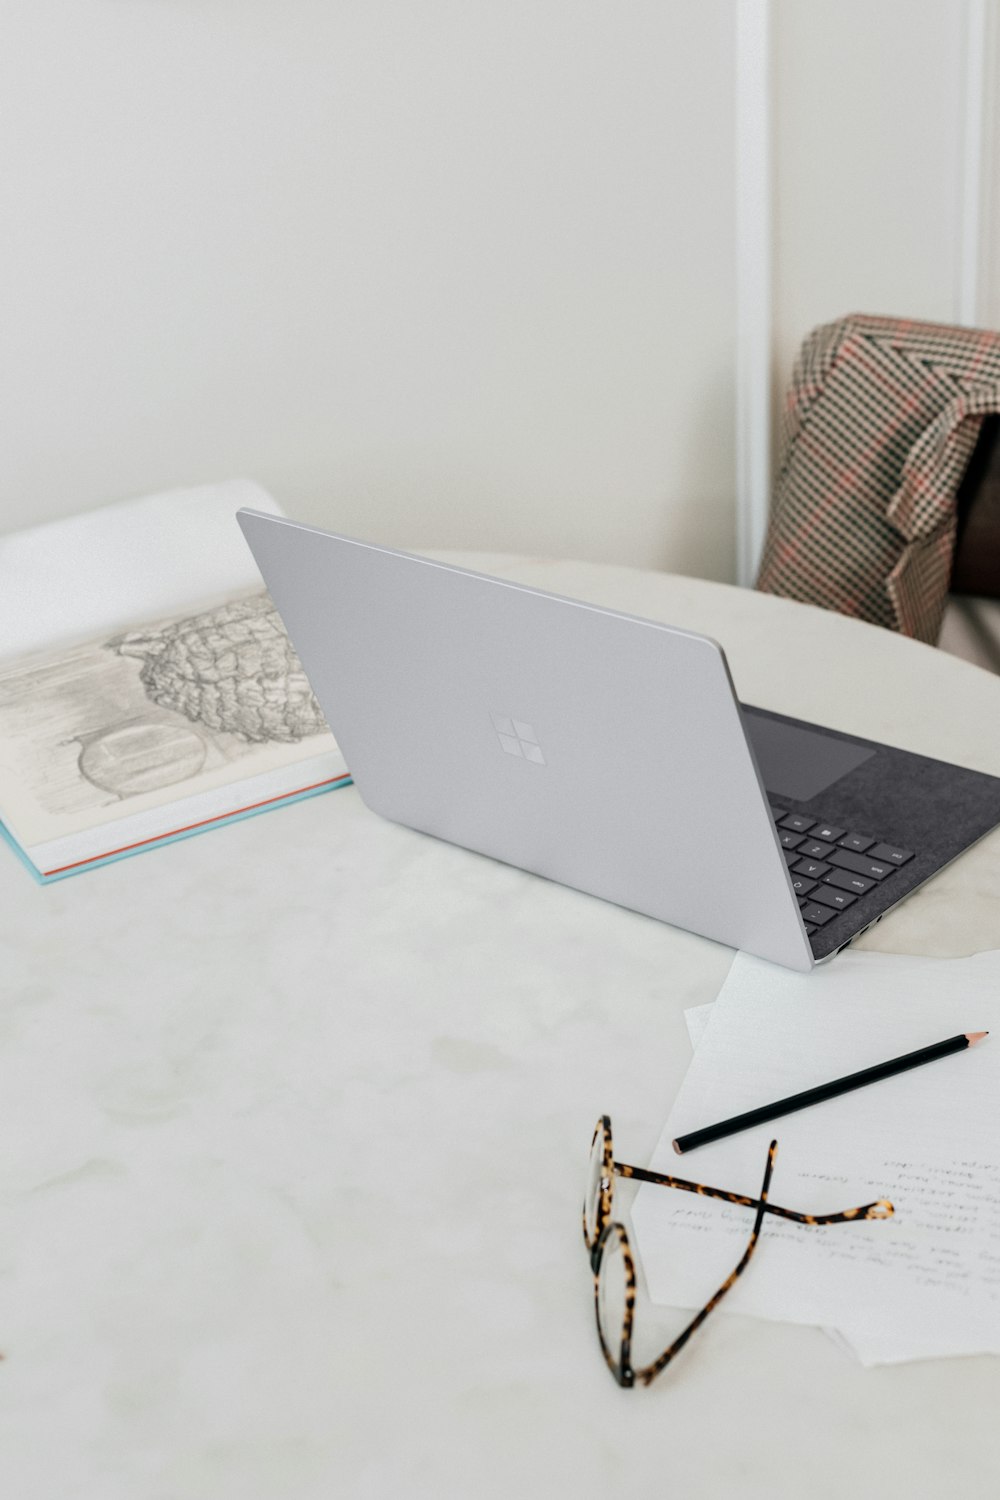 microsoft surface laptop  on white table